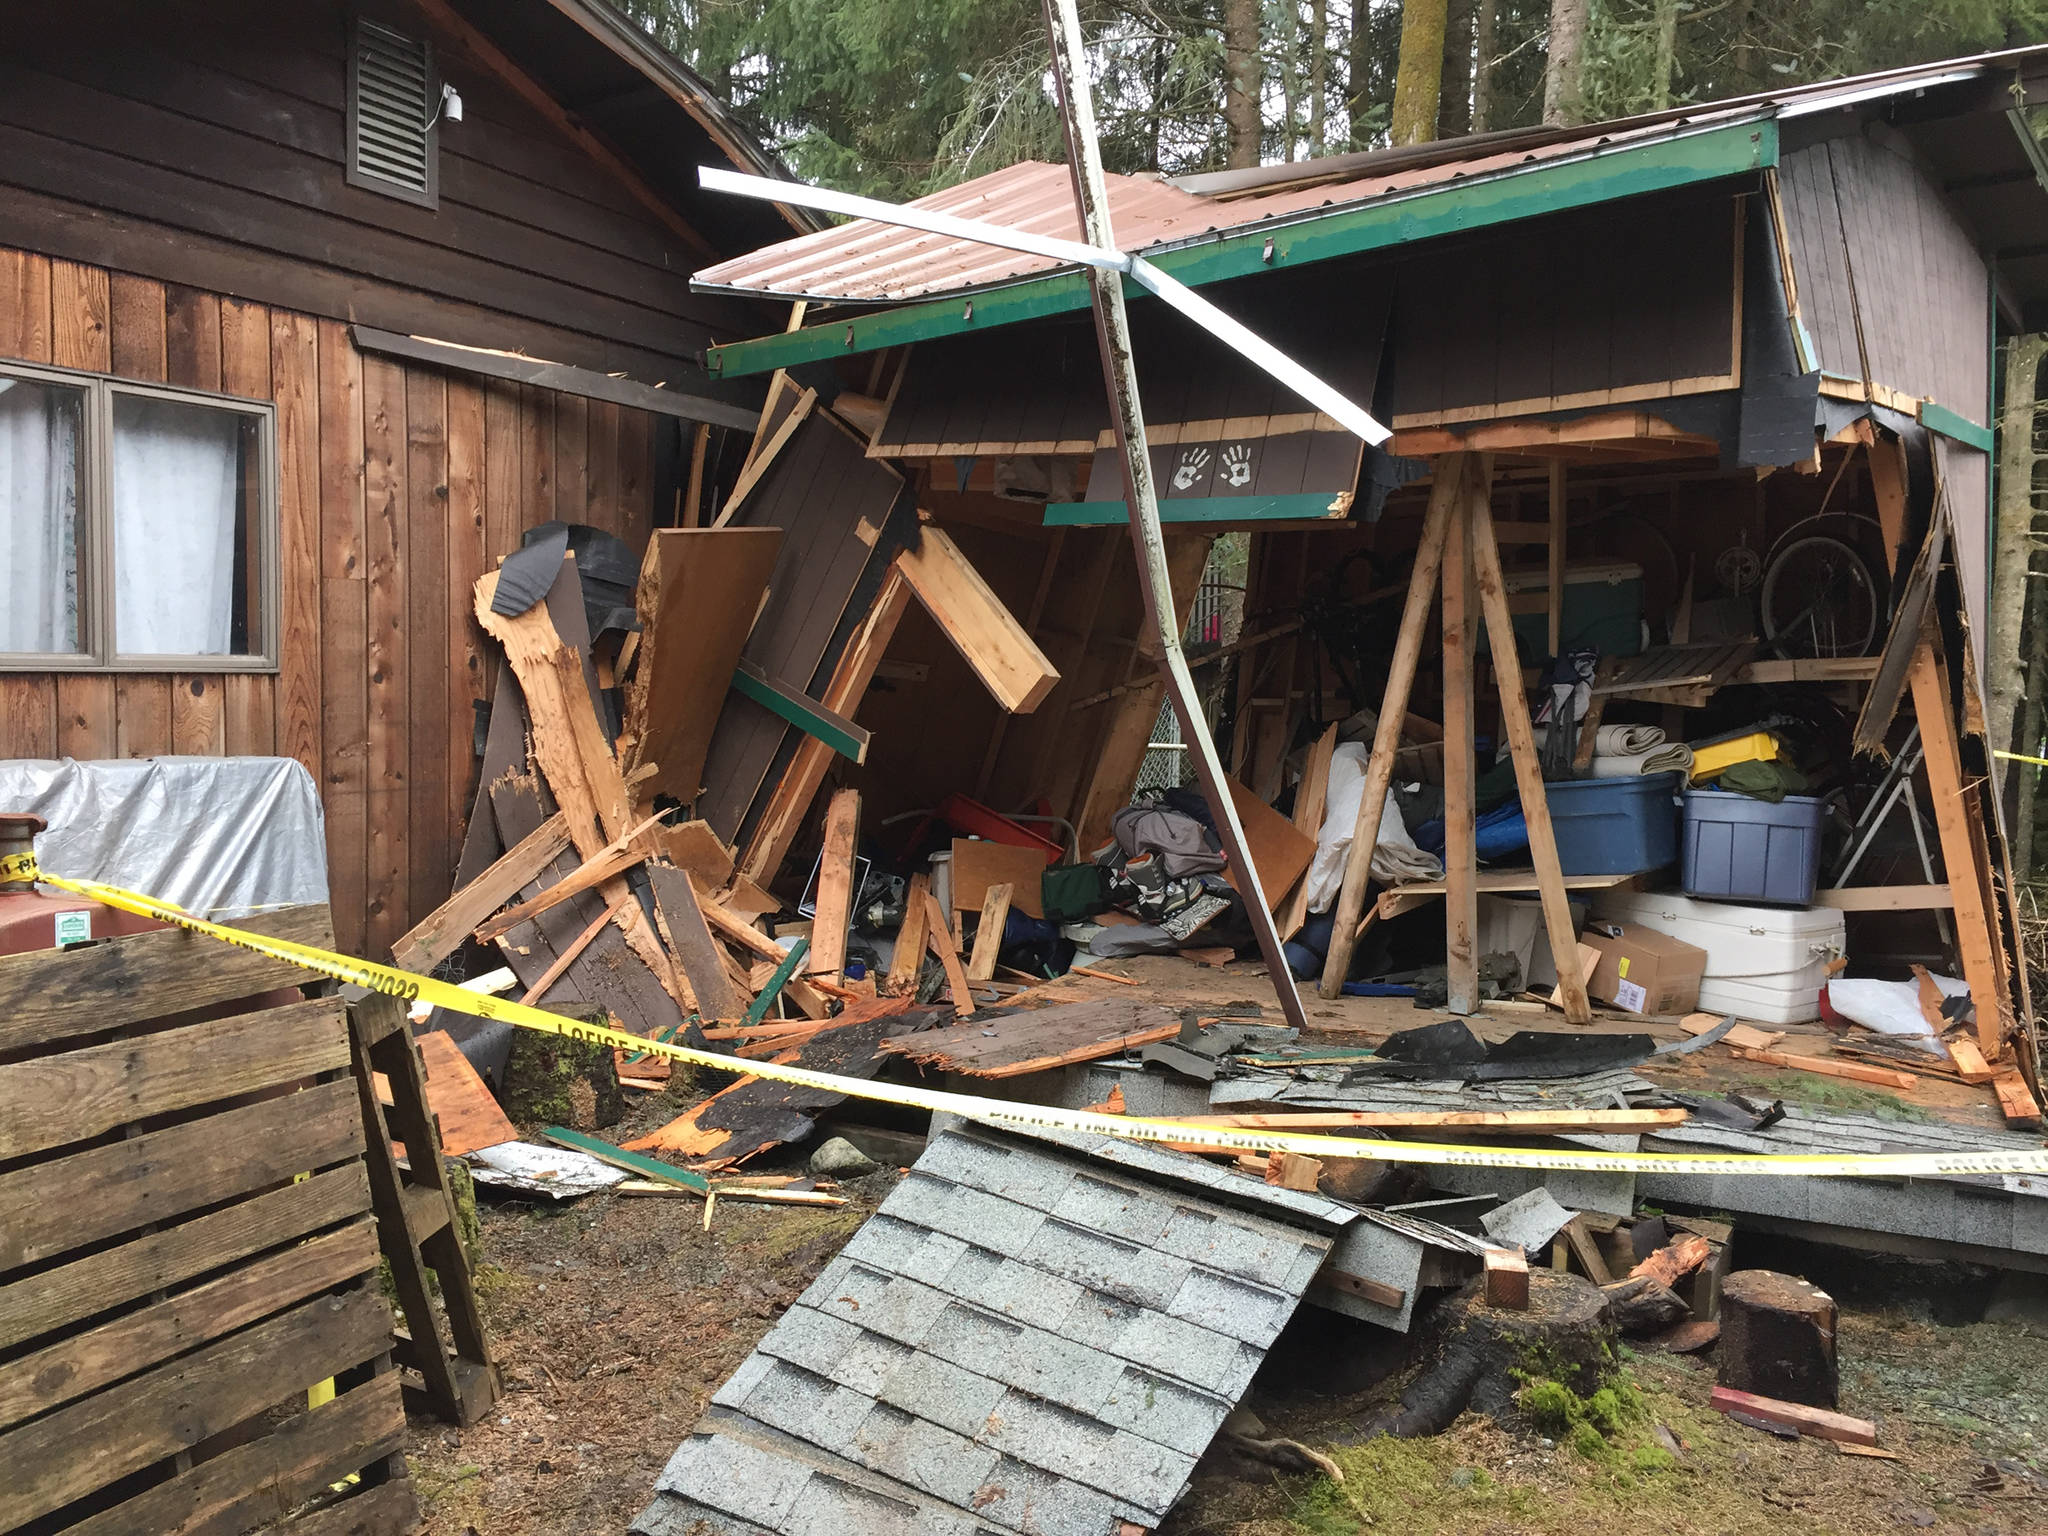 A shed is destroyed outside a Mendenhall Loop home that was hit by a drunk driver on Friday evening. (Kevin Gullufsen | Juneau Empire)